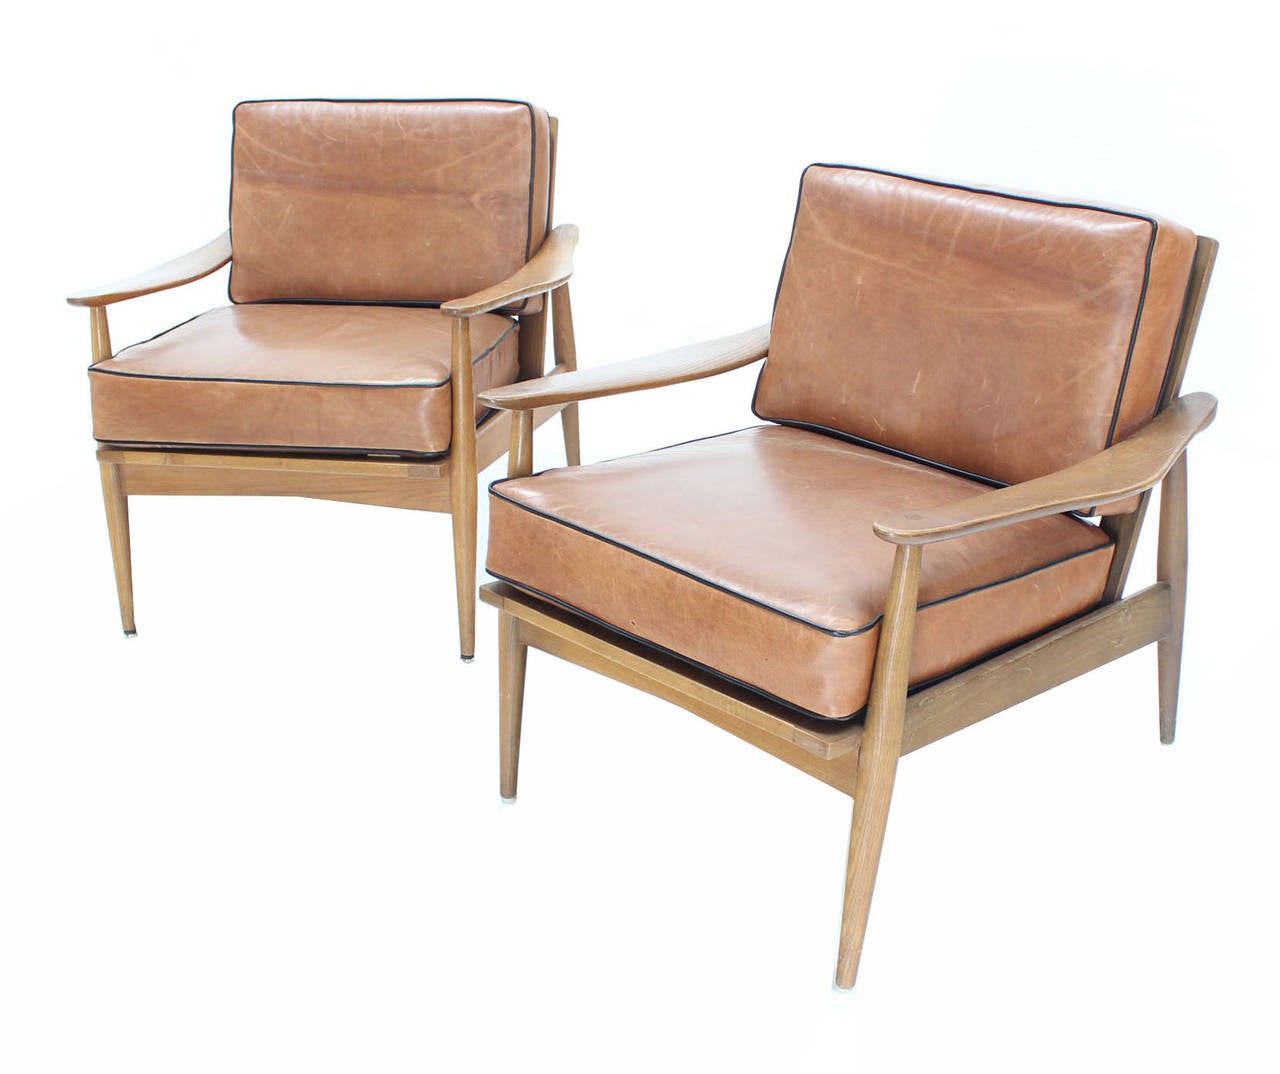 Pair of Danish Mid-Century Modern Leather Upholstery Lounge Chairs 4